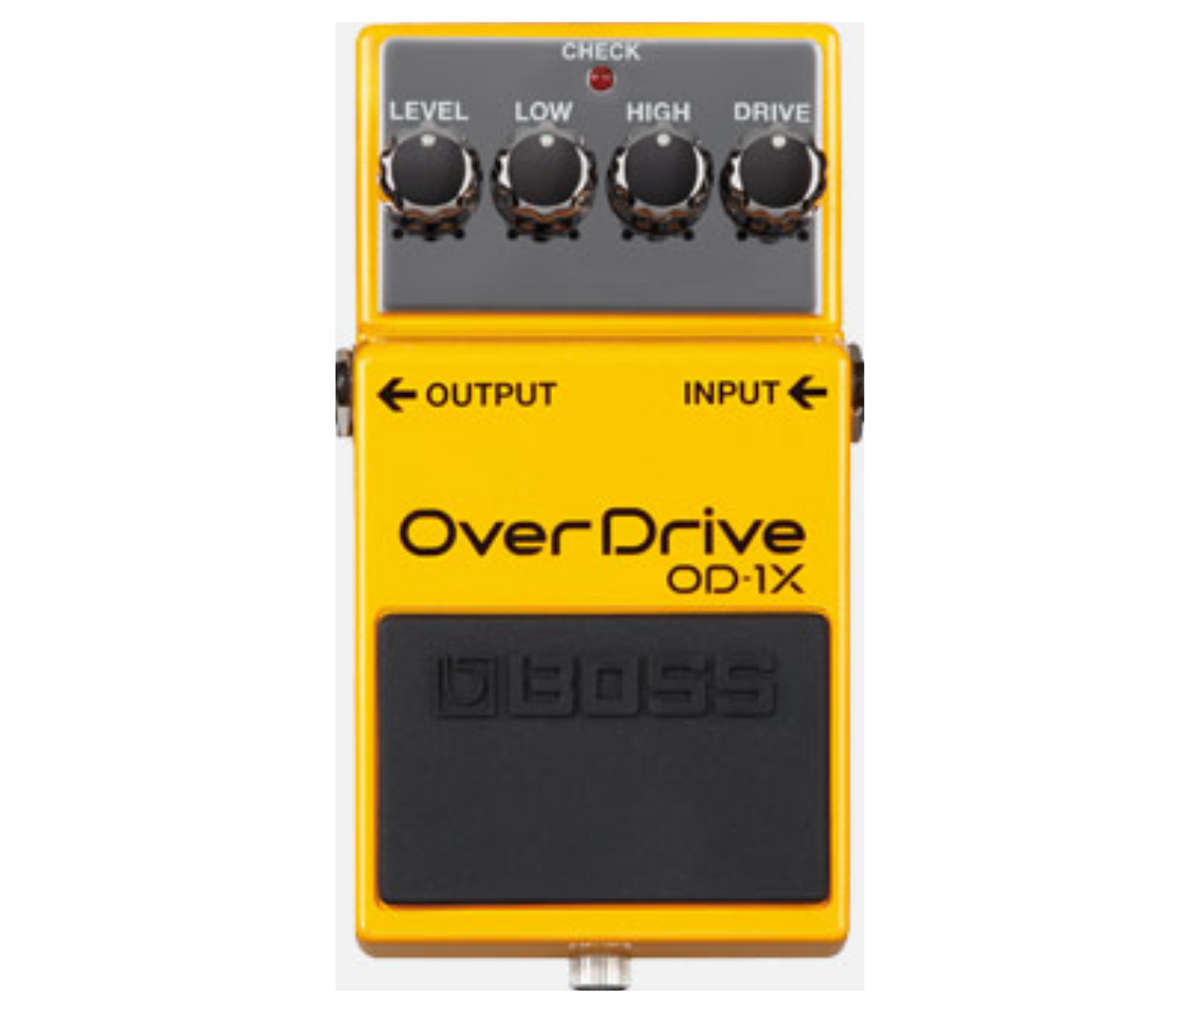 BOSS OD-1X OverDrive Best Guitar Effects Pedal High-definition Tone  Low Noise with High-gain Settings Compact Overdrive Pedal